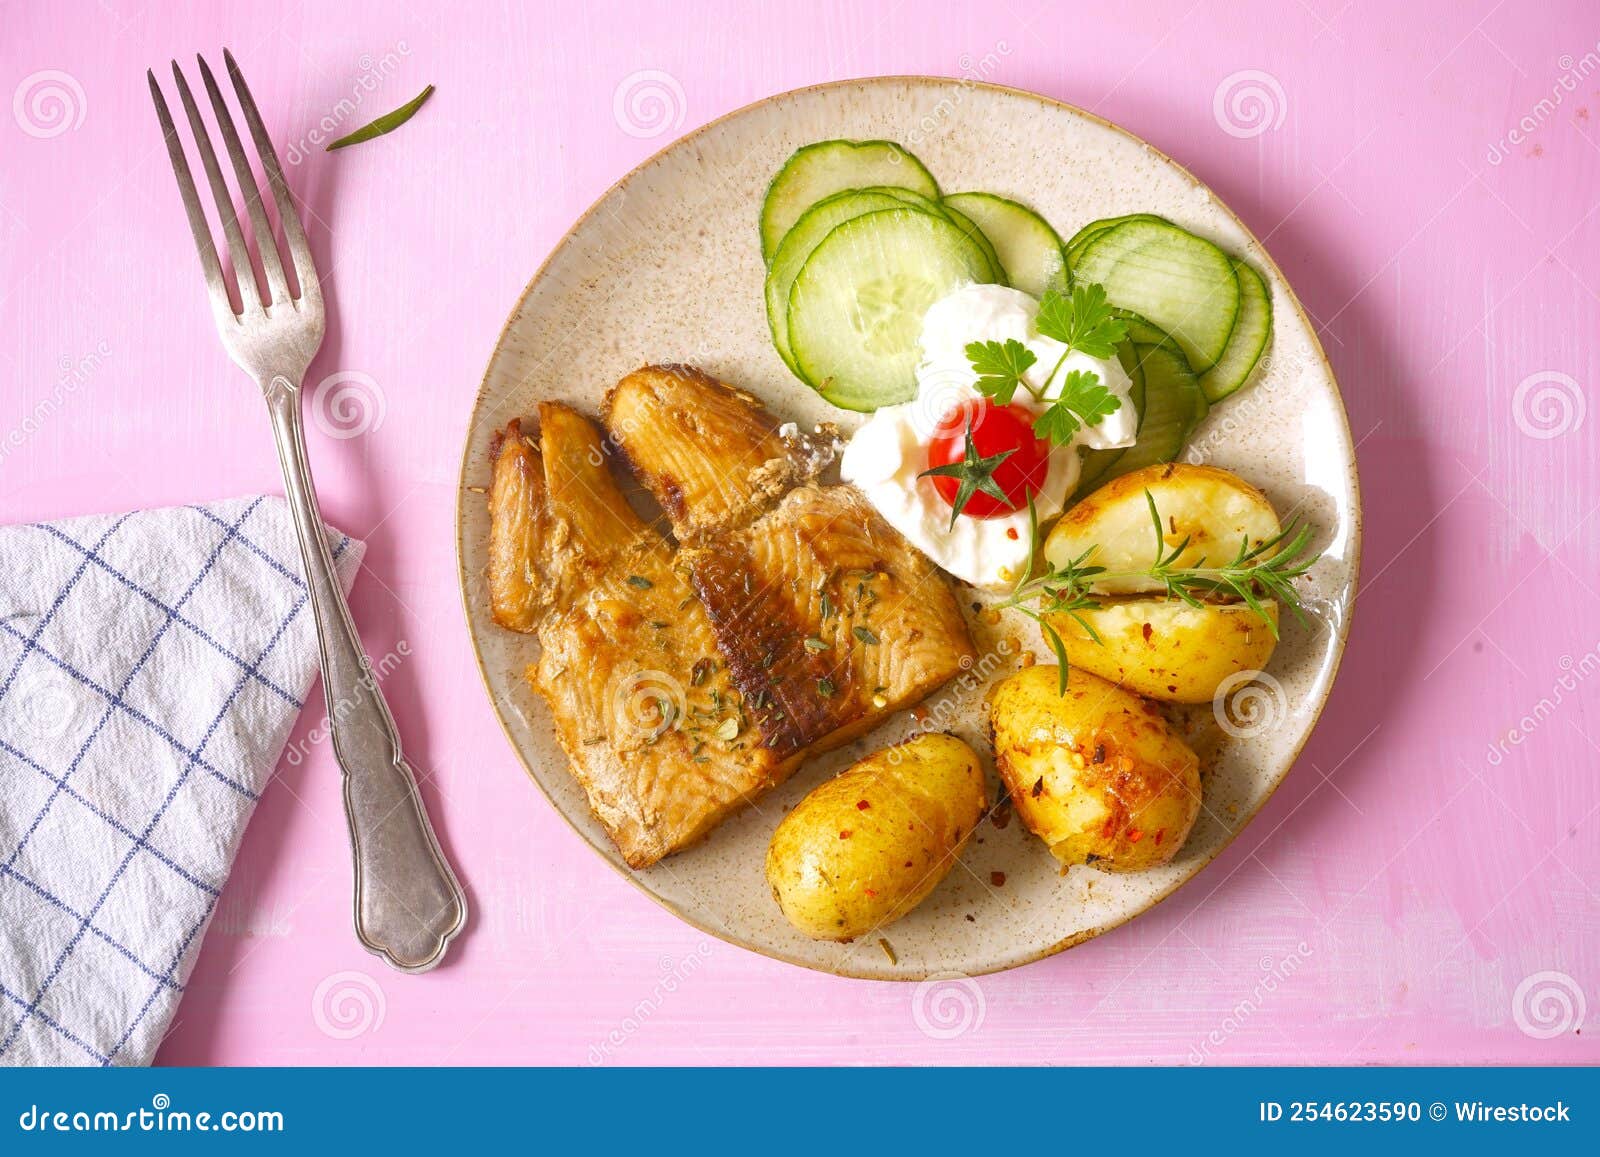 Closeup of a Plate with Cooked Fish and Vegetables. Stock Photo - Image ...